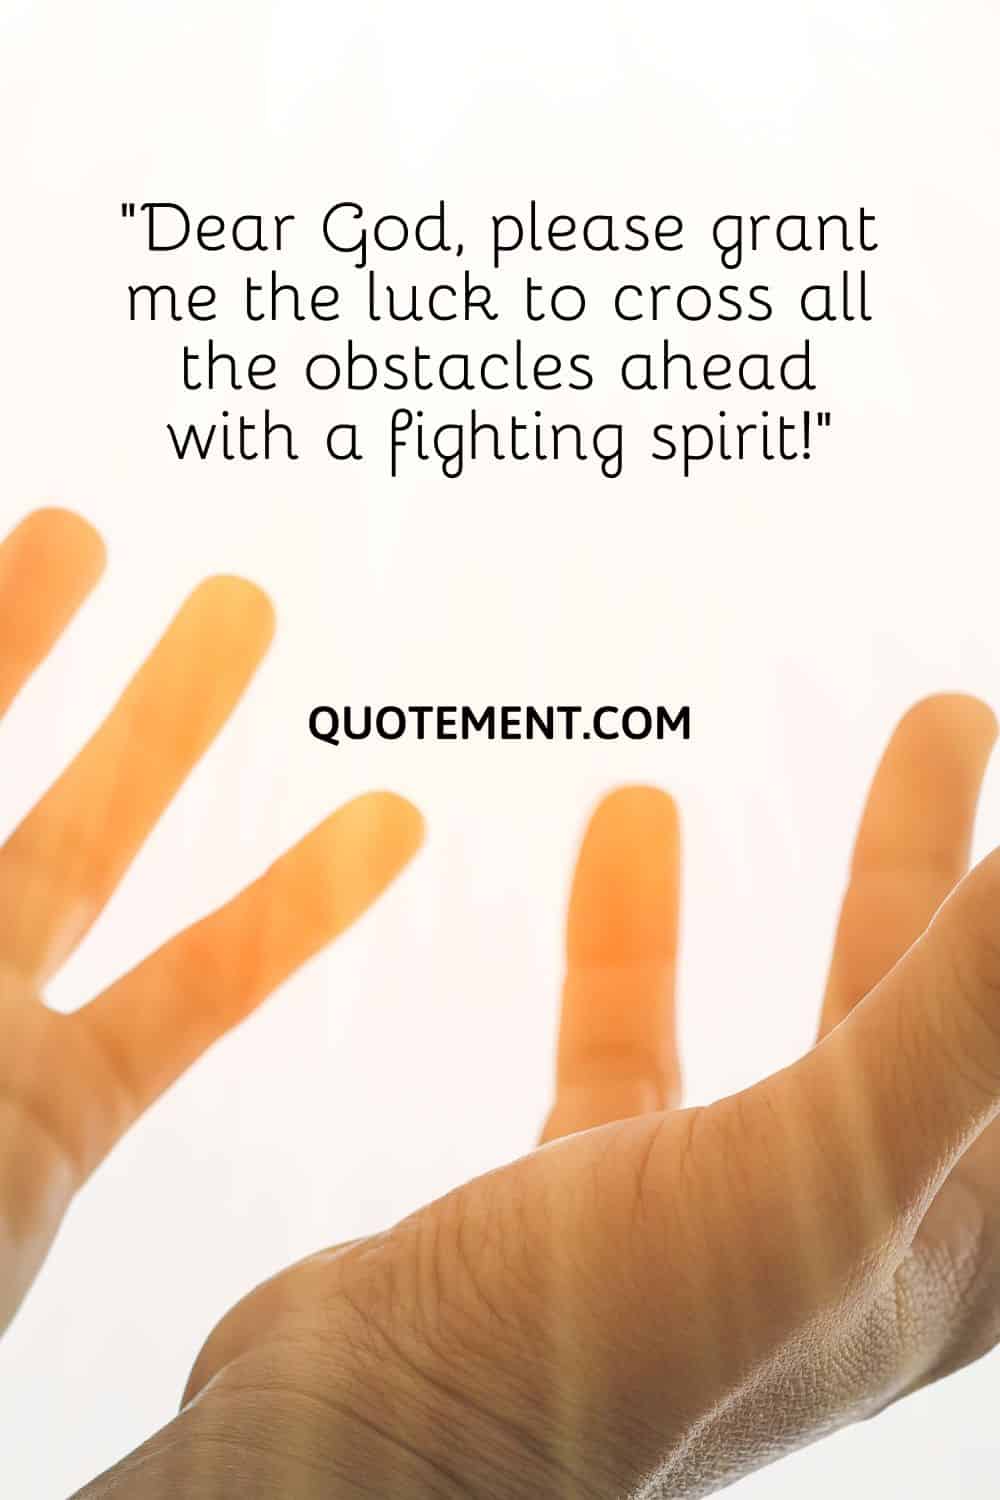 “Dear God, please grant me the luck to cross all the obstacles ahead with a fighting spirit!”